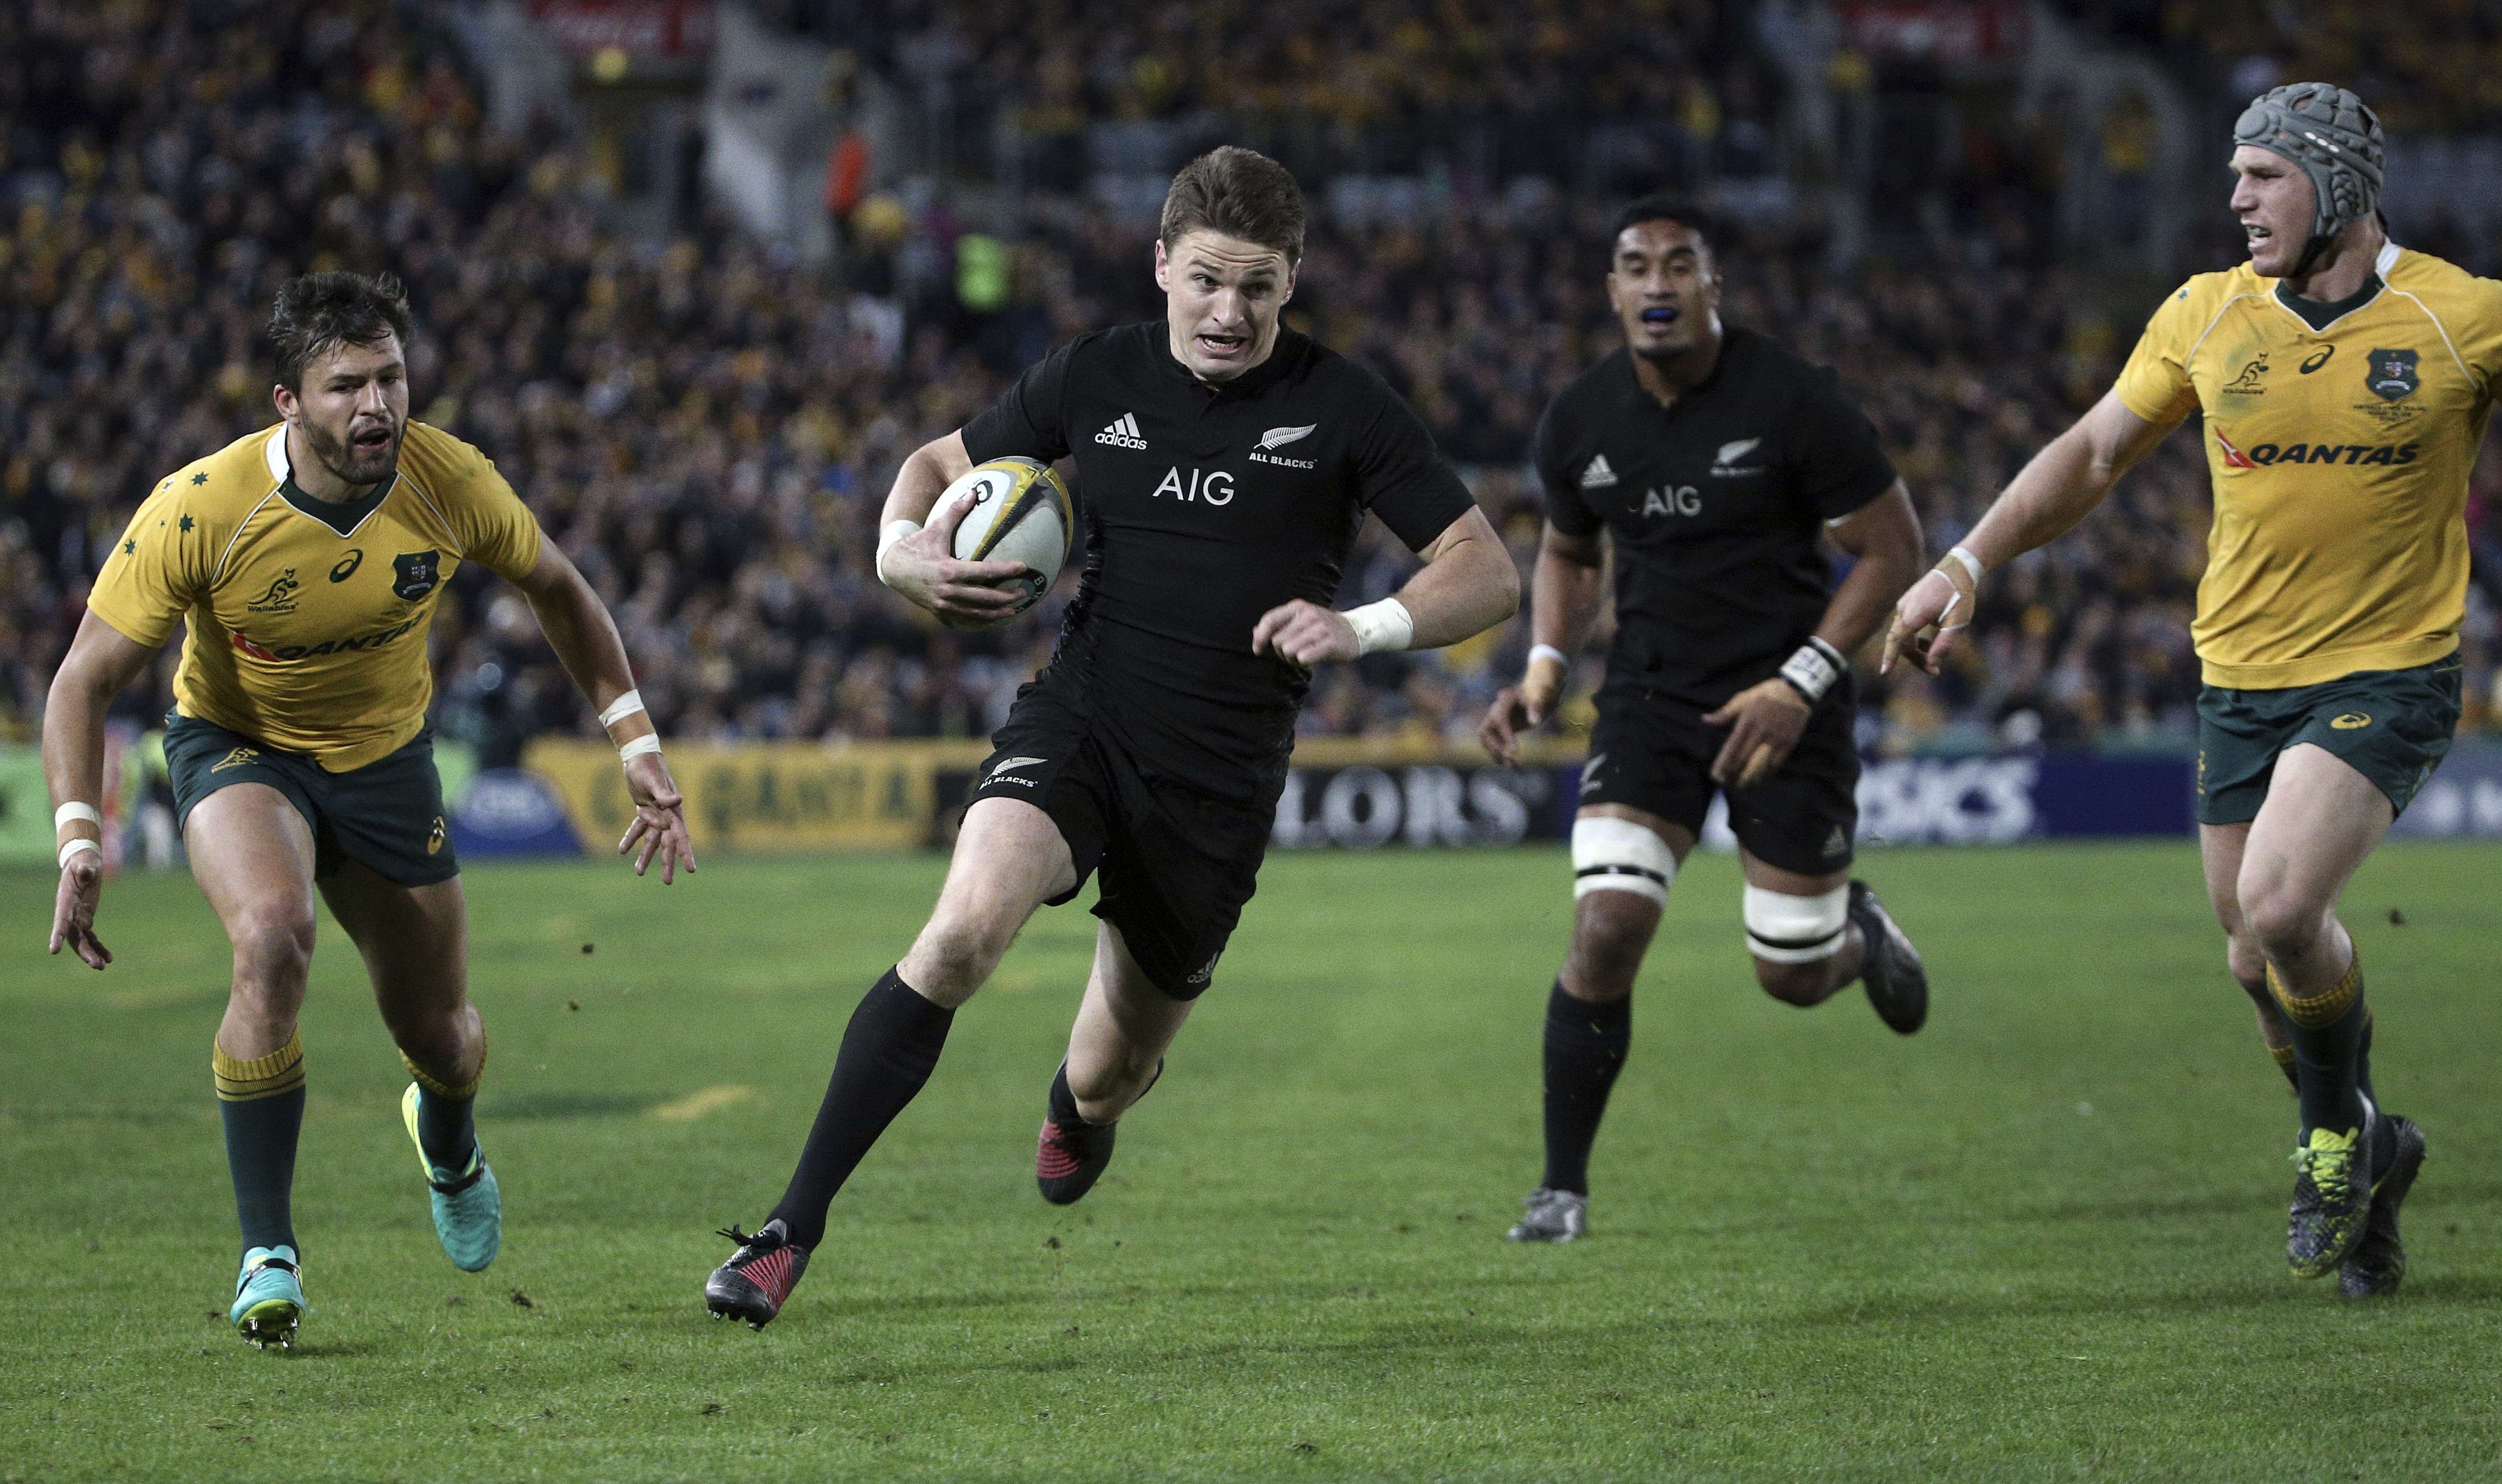 Beauden Barrett runs in to score a try for the All Blacks in their Rugby Championship clash with Australia in Sydney on Saturday. Photo: AP